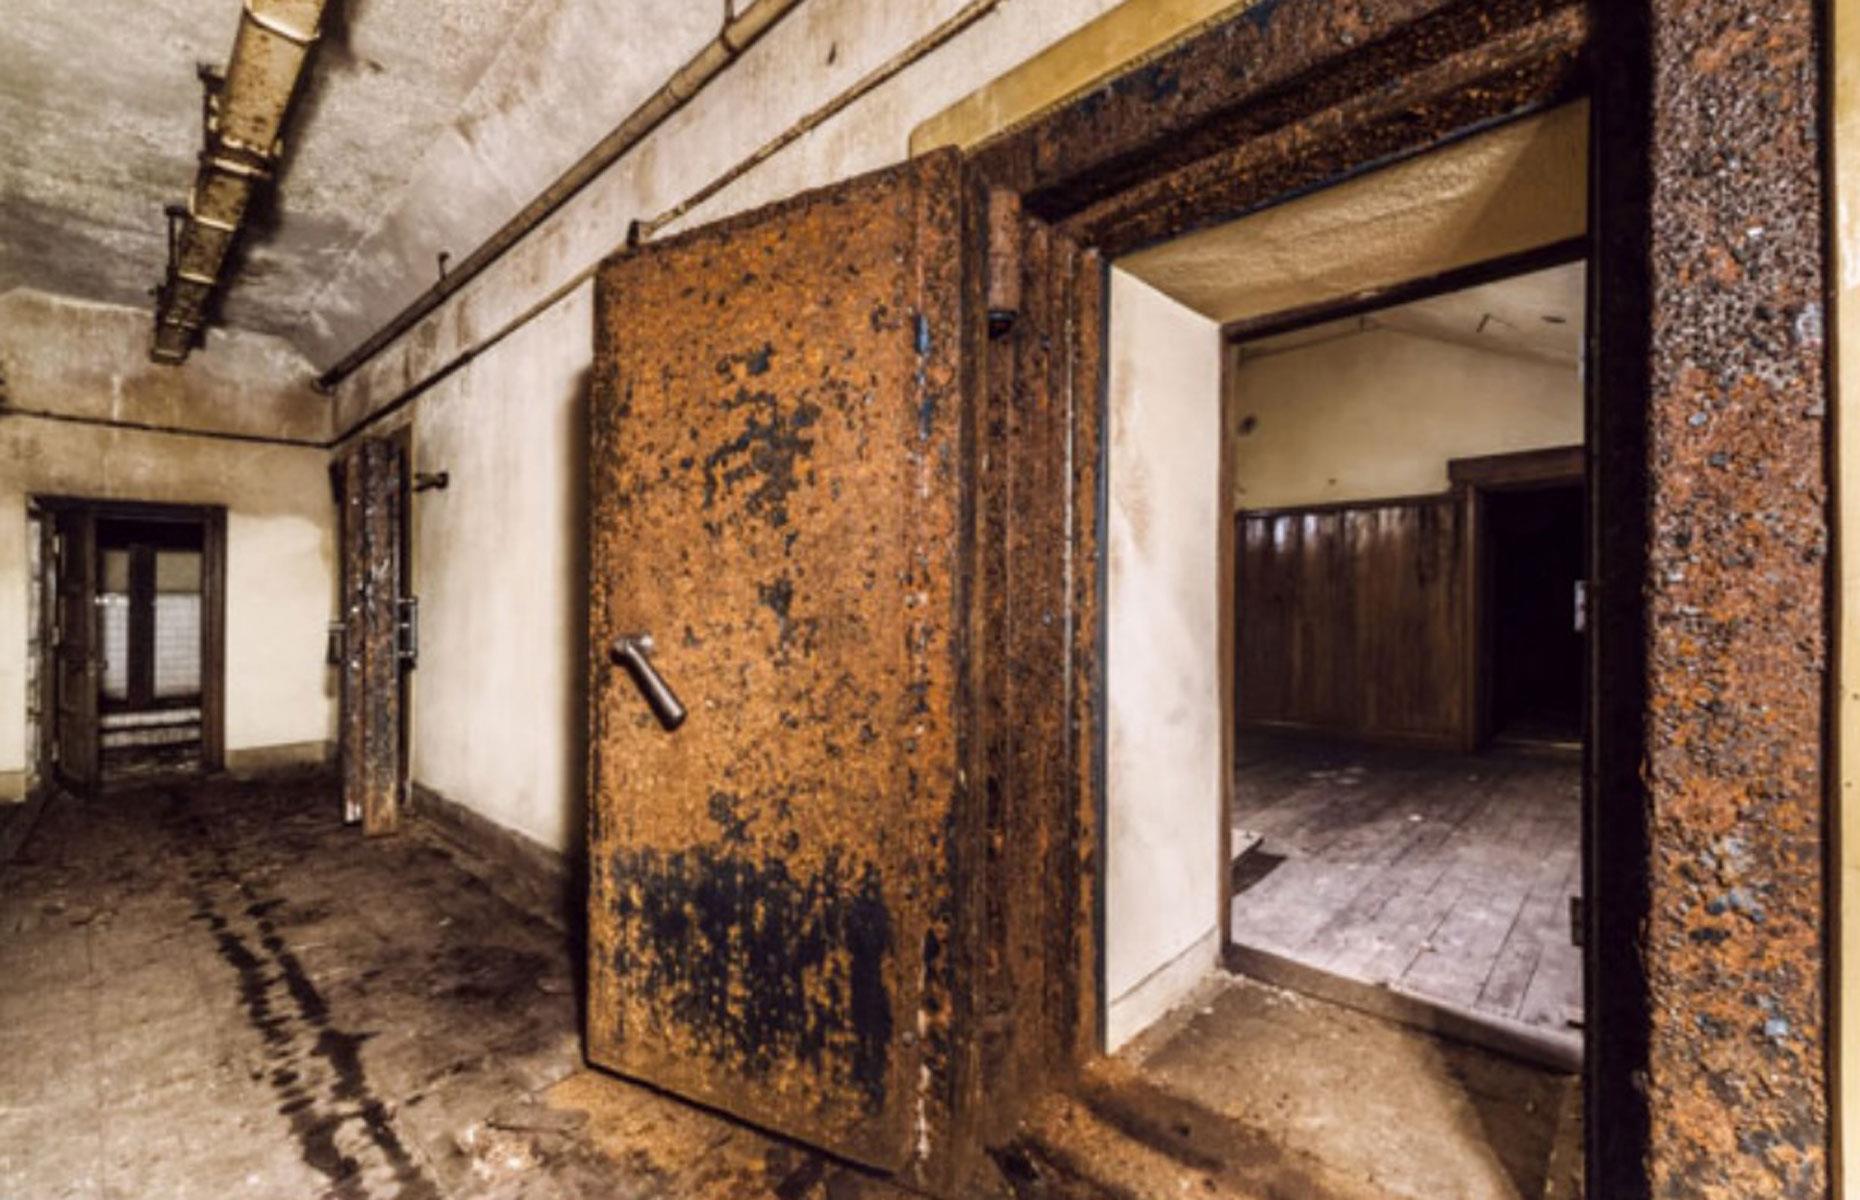 <p>As you can see from this shot of the desolate passageway, the bunker's anti-gas blast doors are covered in rust and rising damp stains the walls. Still, there's very little in the way of severe structural damage, judging by the picture. This <a href="https://www.loveproperty.com/gallerylist/91803/awesome-abandoned-bunkers-for-sale">abandoned bunker</a> was certainly built to last.</p>